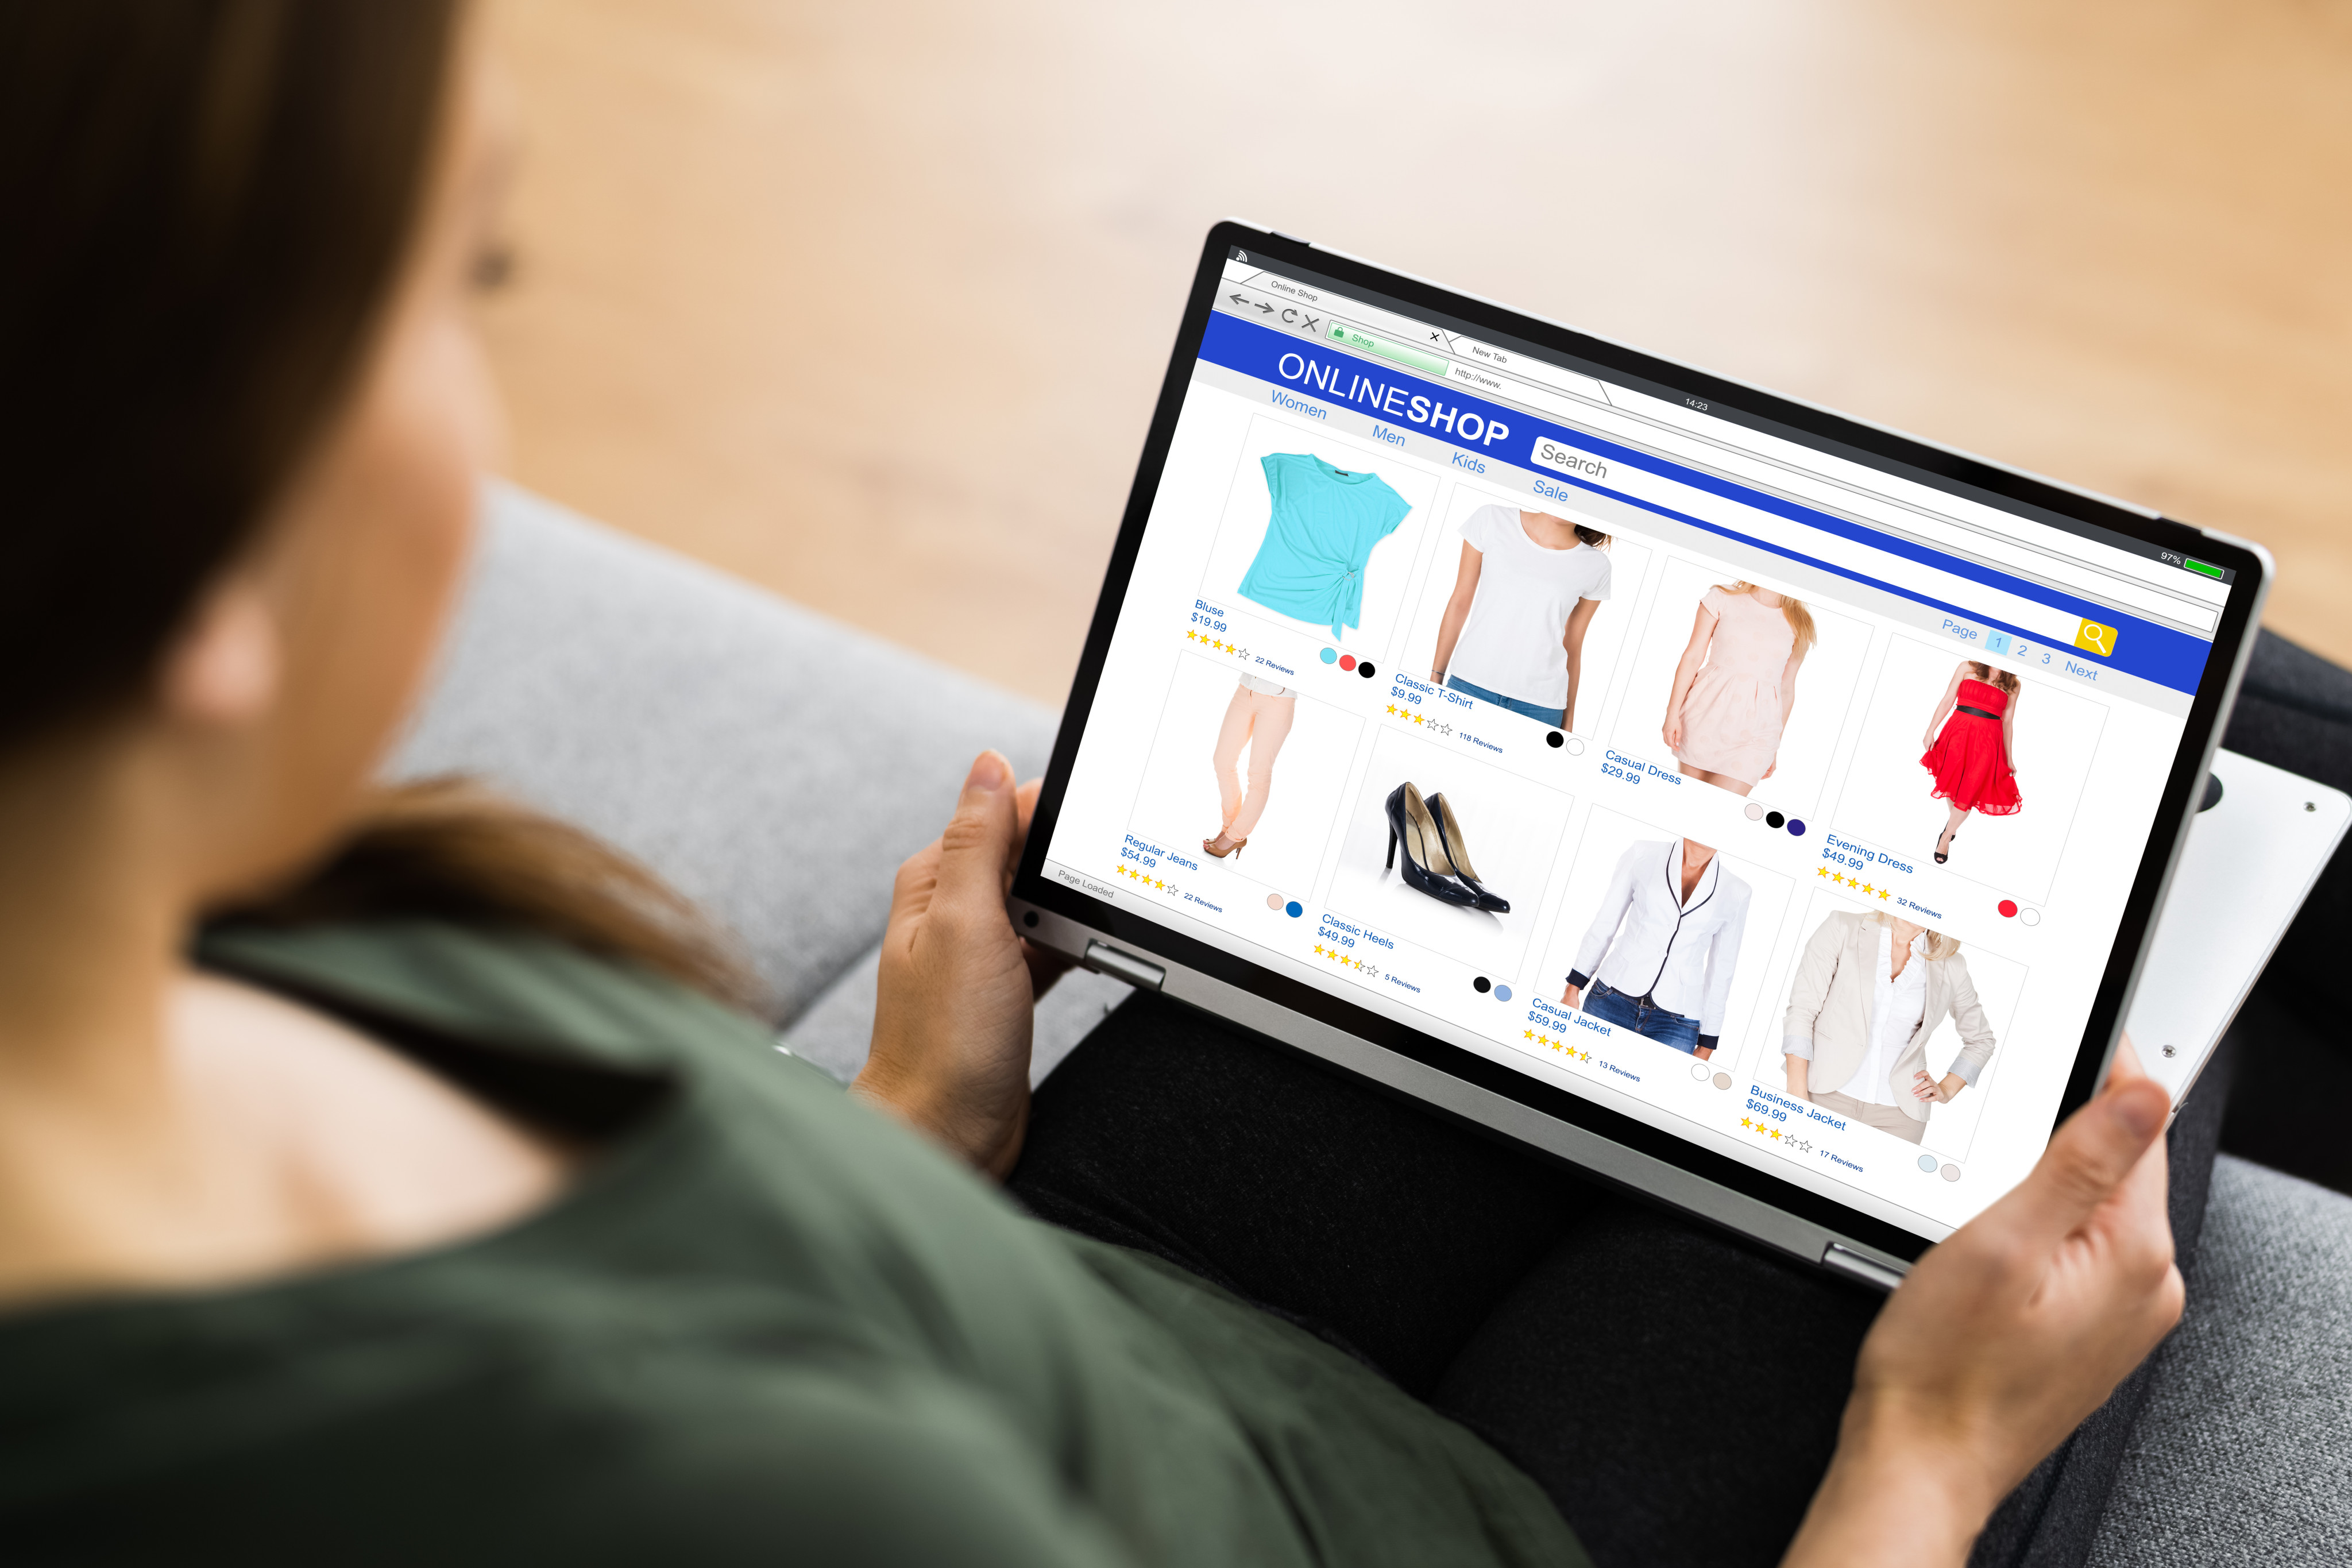 Online shopping has taken off during the pandemic. Small businesses that have shifted their focus online have benefited immensely. Photo: Shutterstock